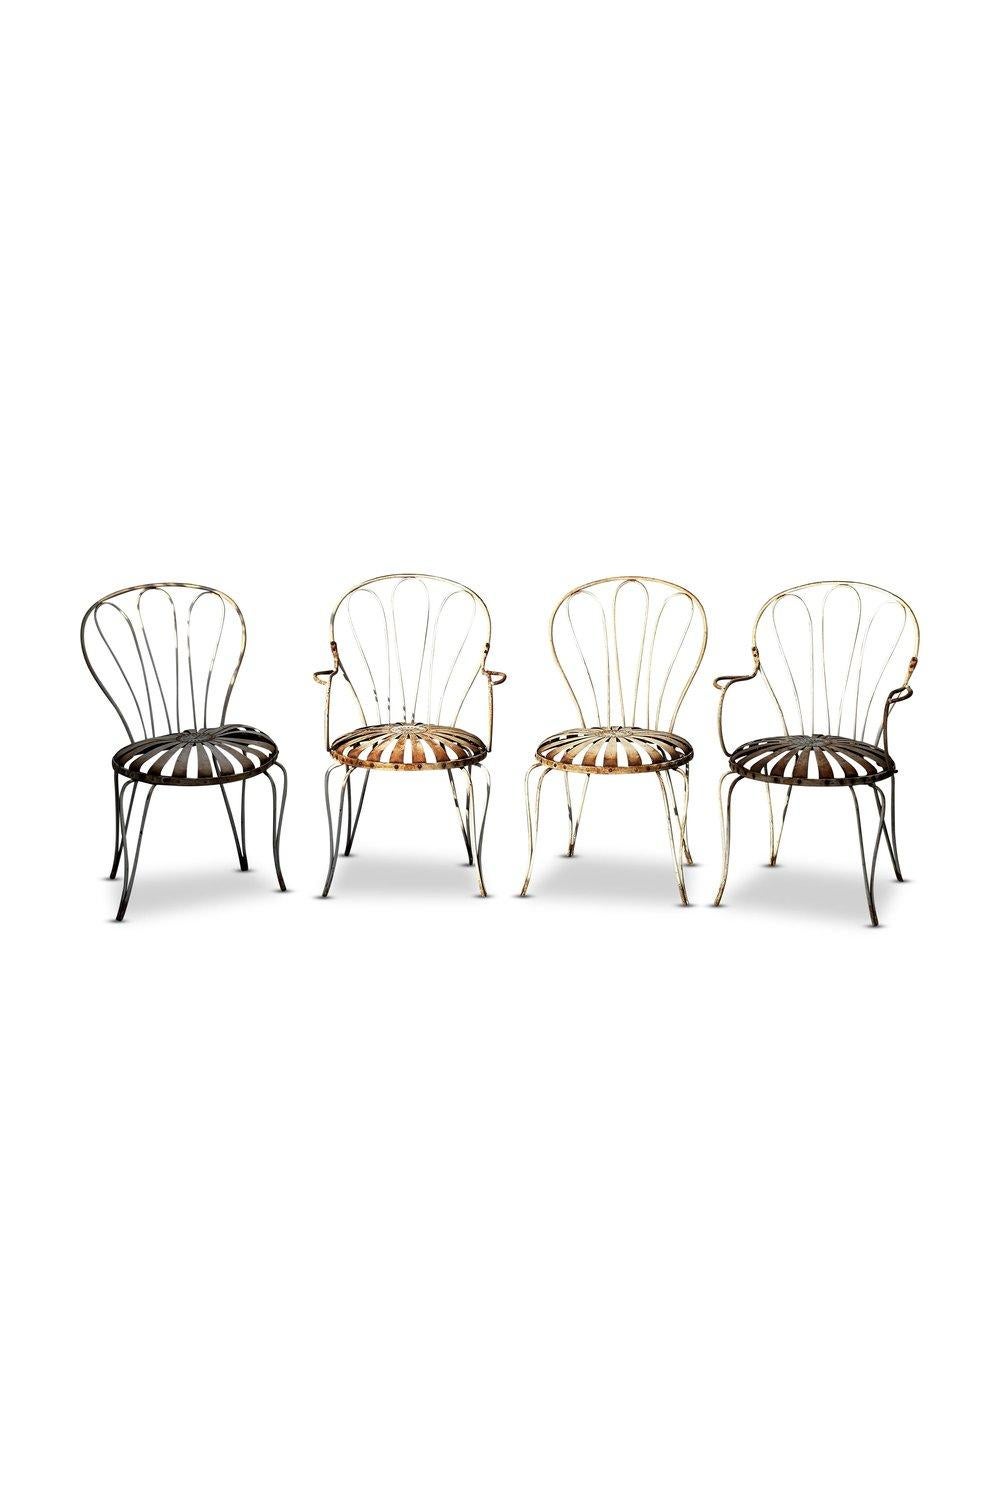 French designer, Francois Carré, a maestro of wrought iron craftsmanship during the early 20th century, left an indelible mark on garden furniture design. This ensemble, bearing his name, reflects timeless elegance.

Crafted with precision, each